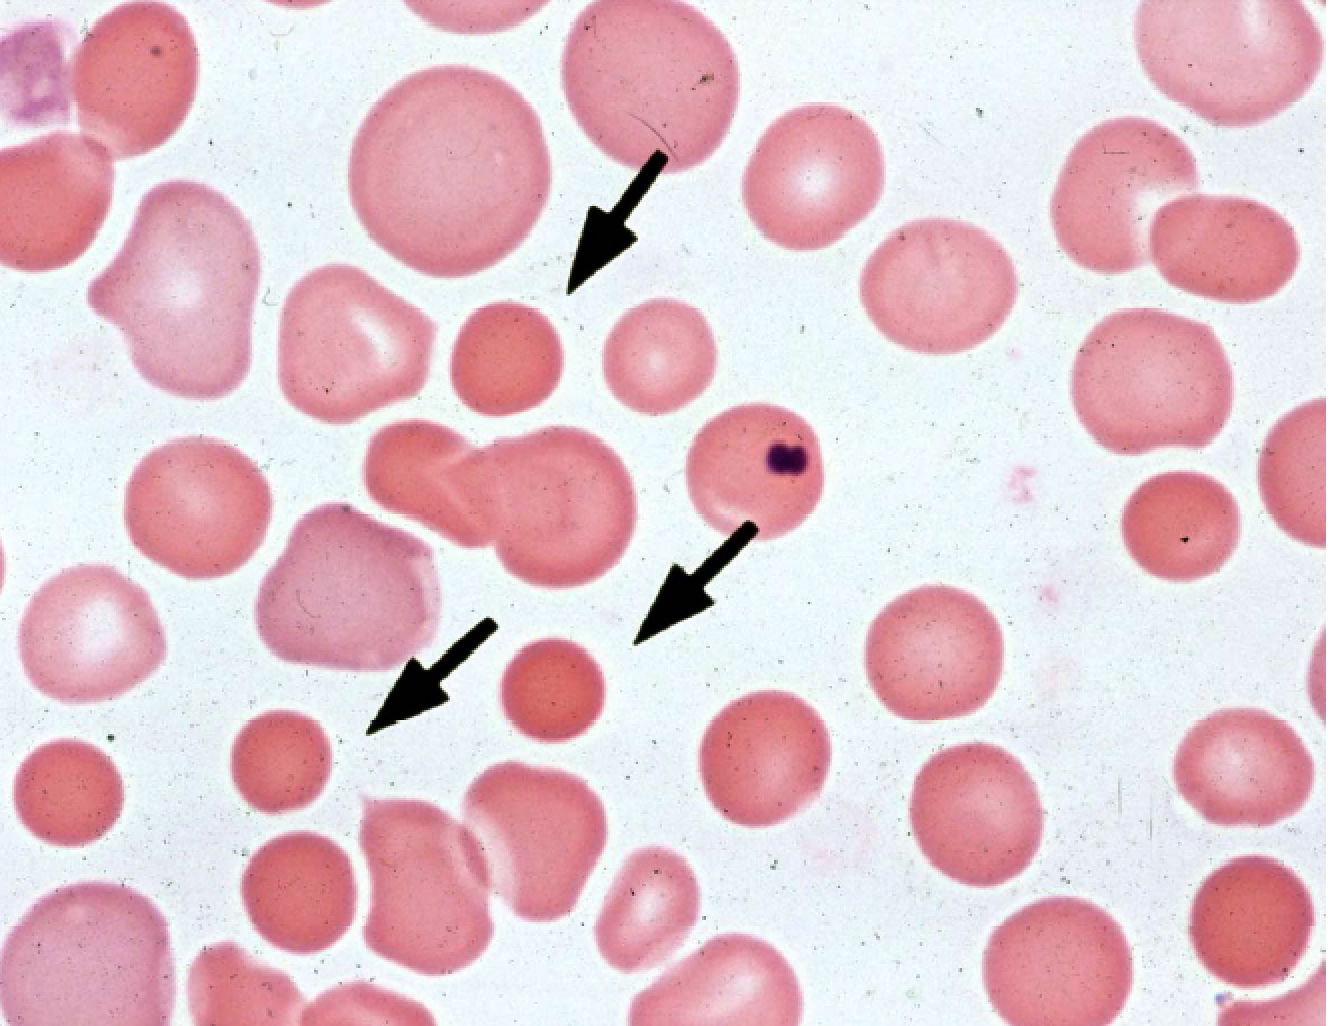 Arrows point to the spherocytes seen on this blood smear (source)